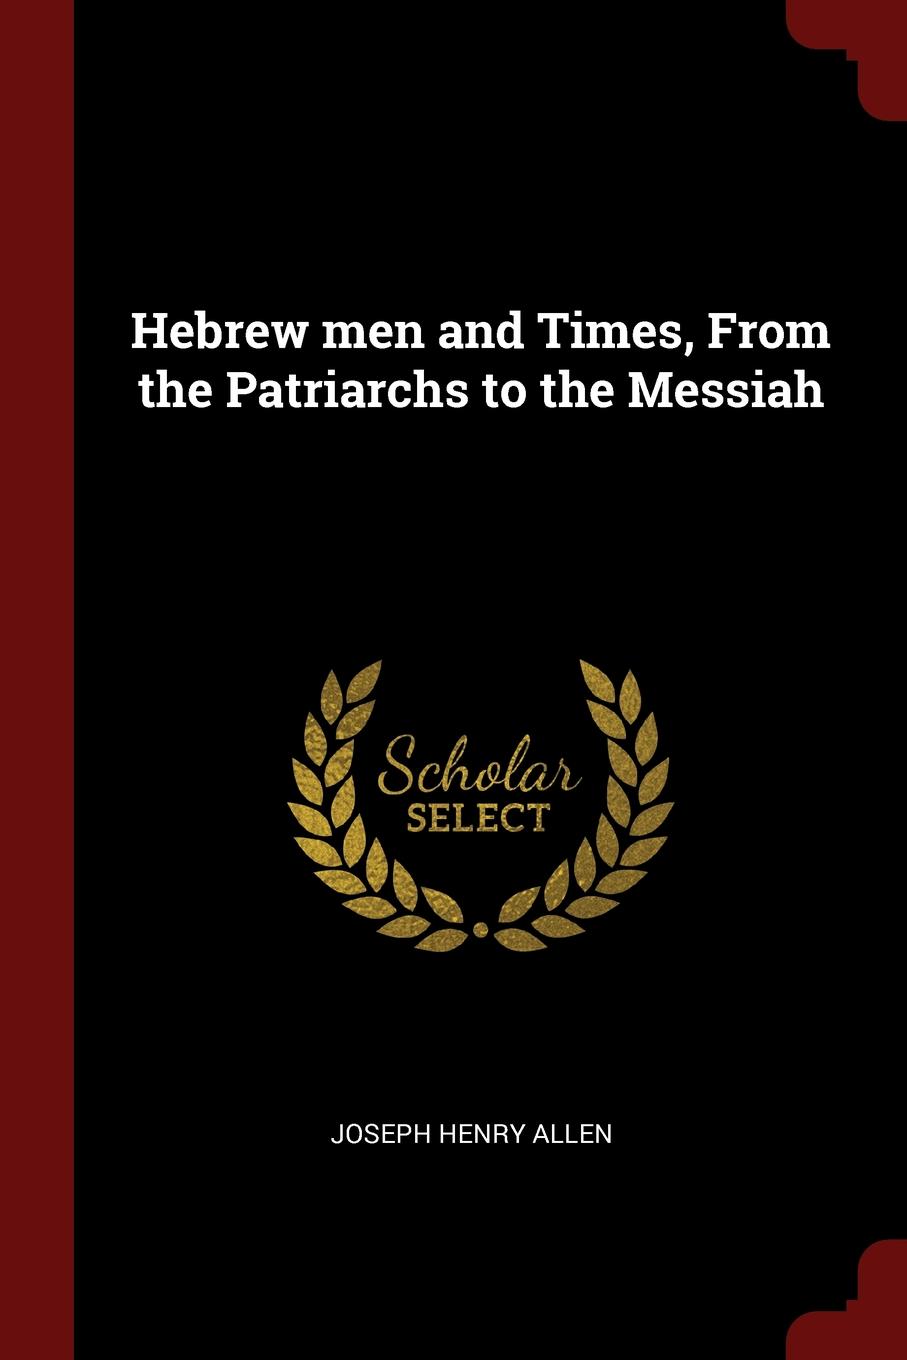 Hebrew men and Times, From the Patriarchs to the Messiah